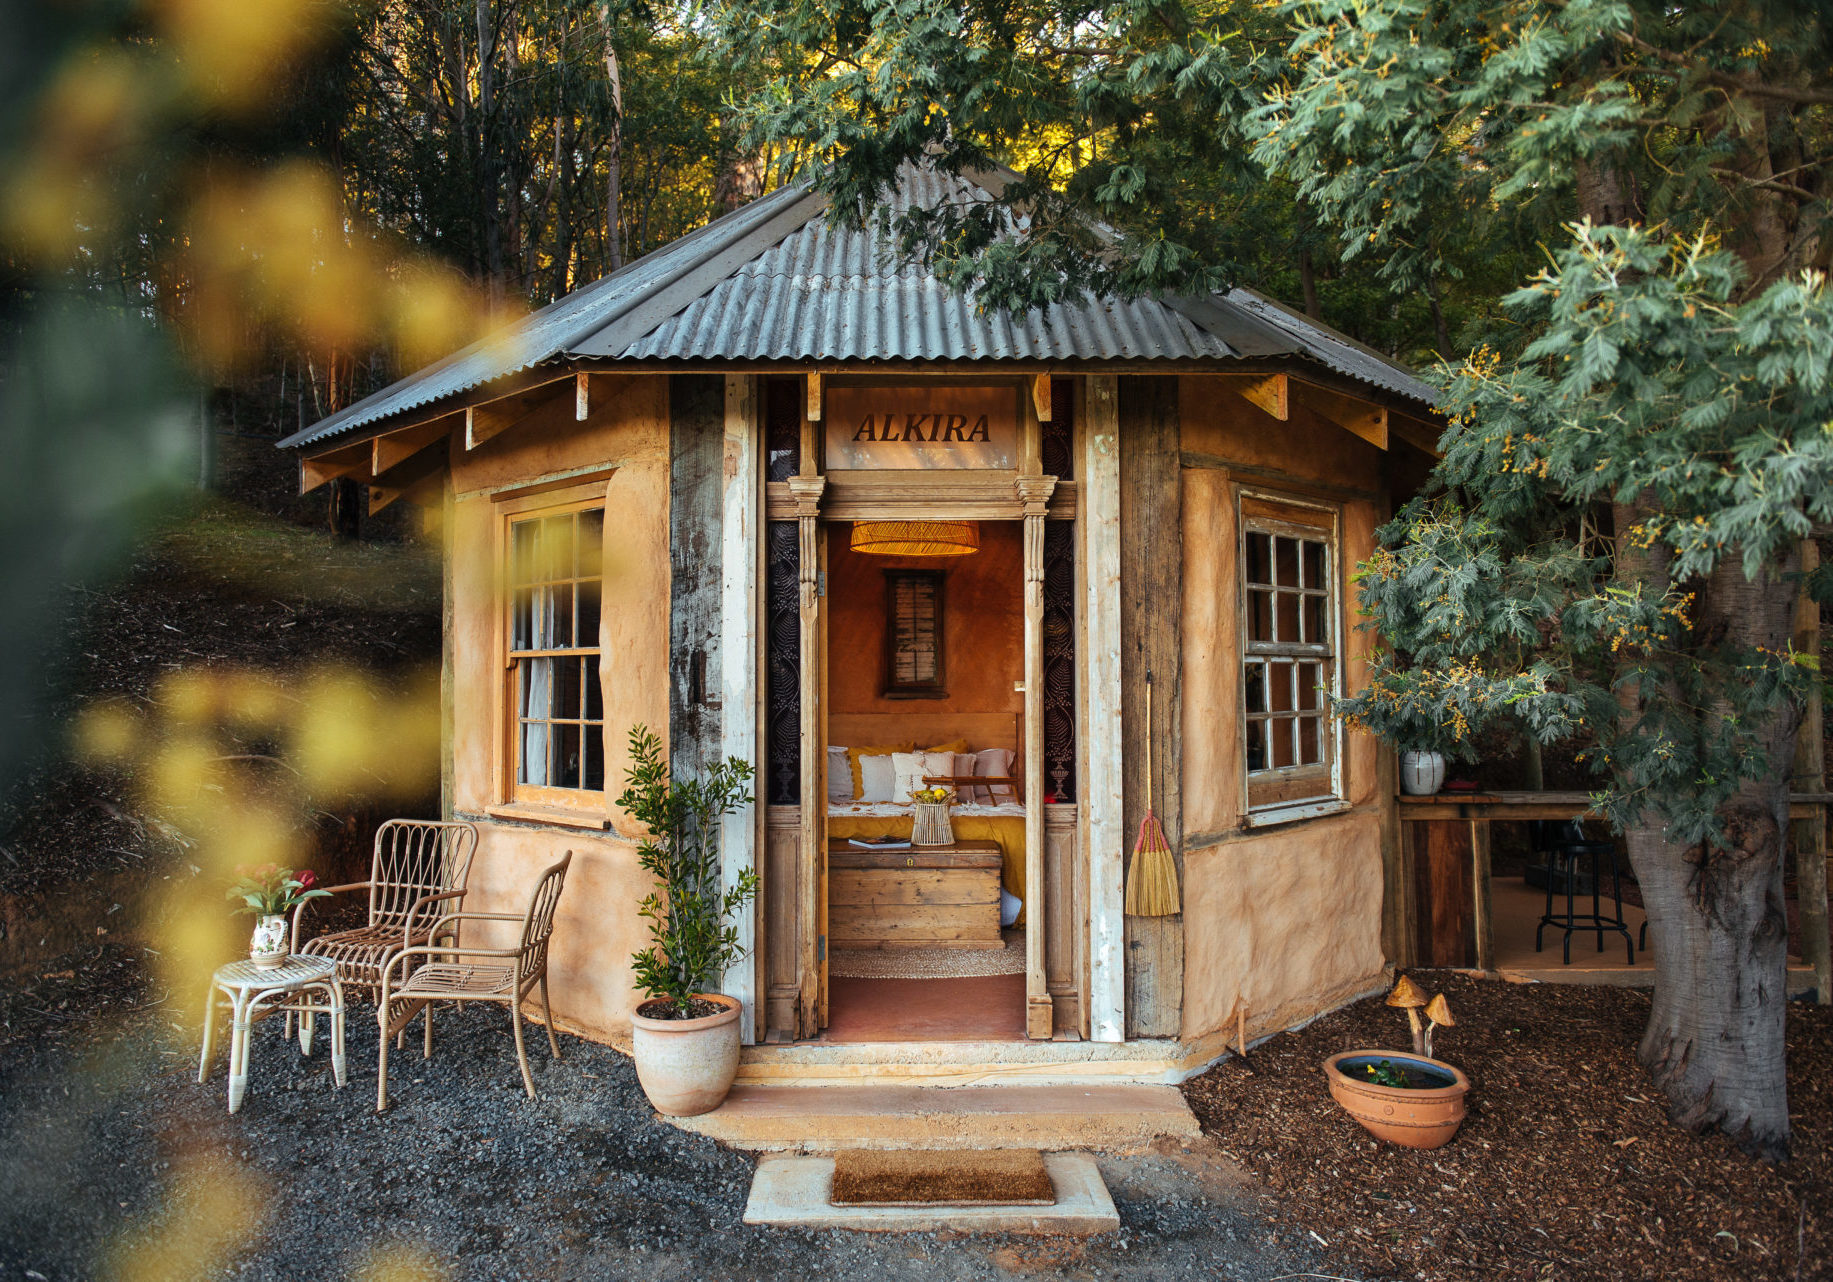 Alkira Eco Glamping Retreat's Yurt provides a serene place to stay while exploring the Dandenong Ranges with your loved one.